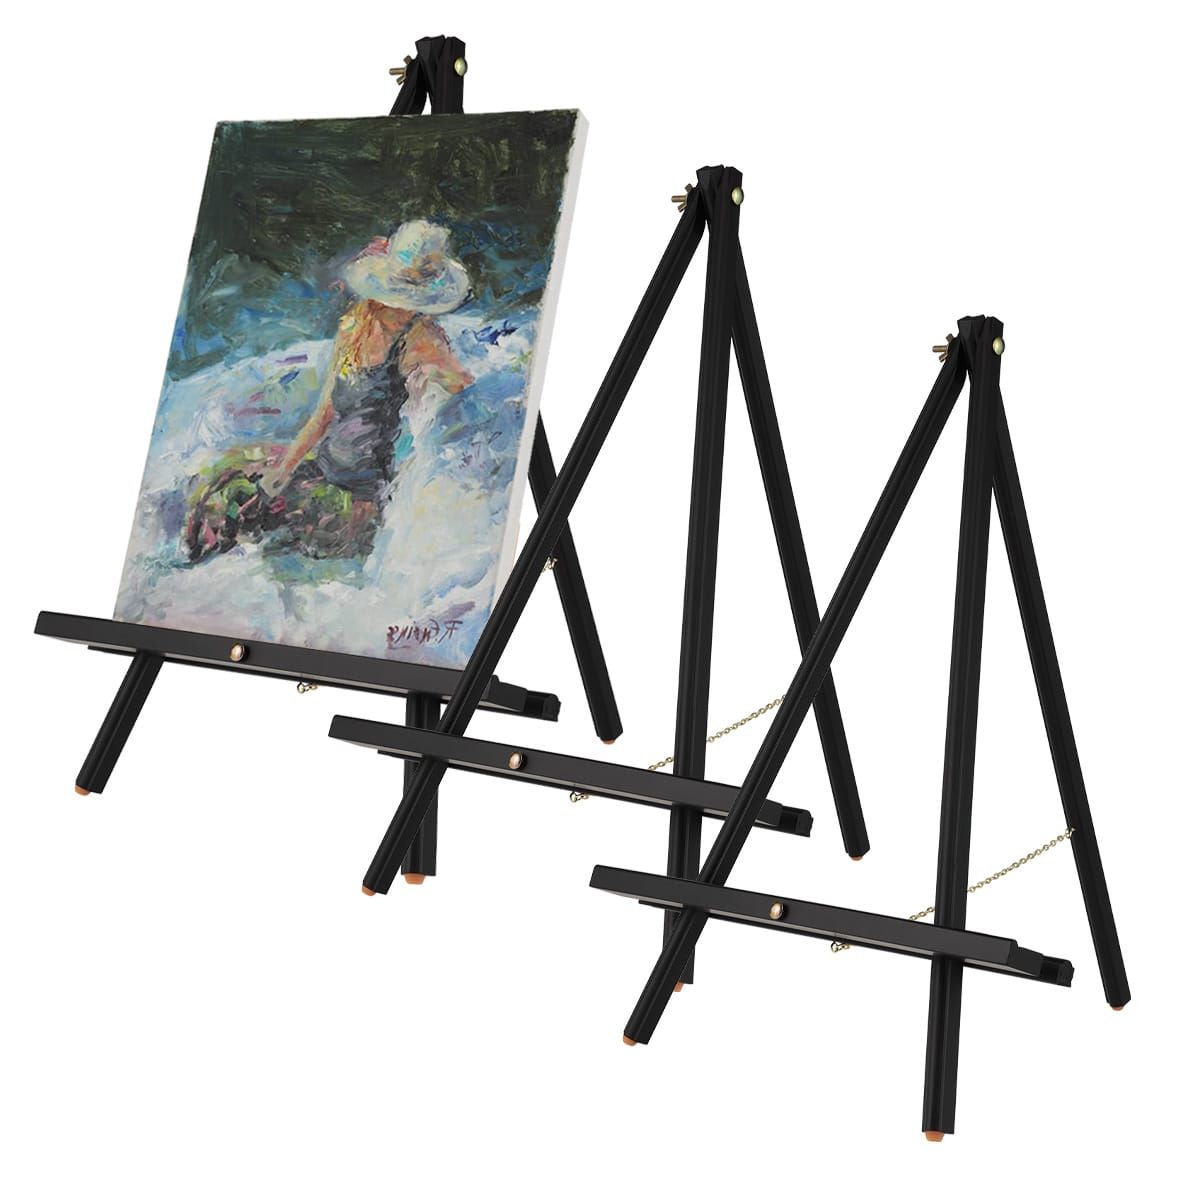 Ultra Mini Stretched Canvas And Easels By Creative Mark (Set of 2